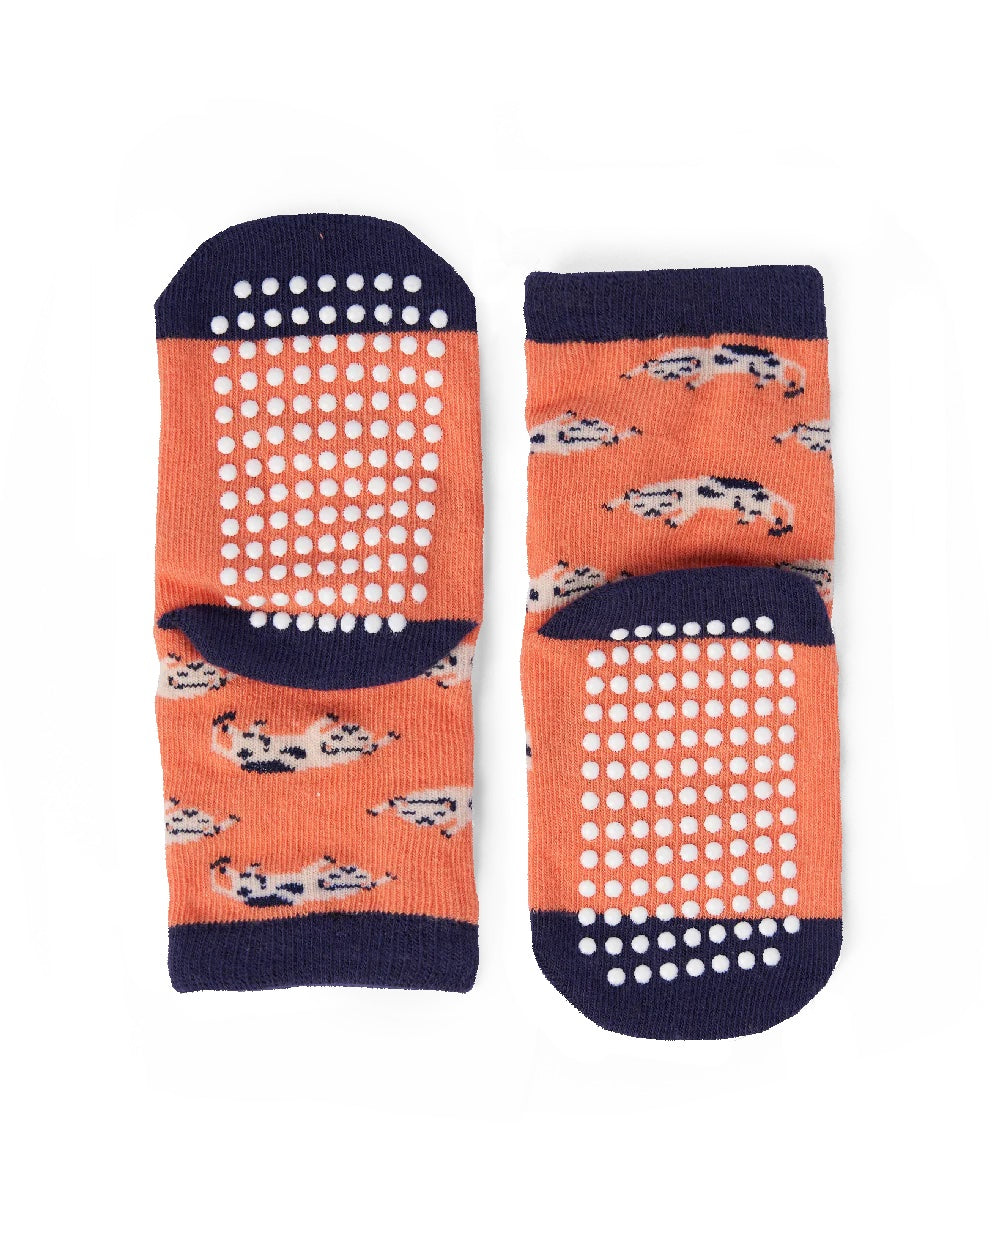 Talking Toes Pack of 2 Kids Crew Sock Set -Sleepy Cat/Naps are Life & Positive Panda/You are enough (2-5 Years)